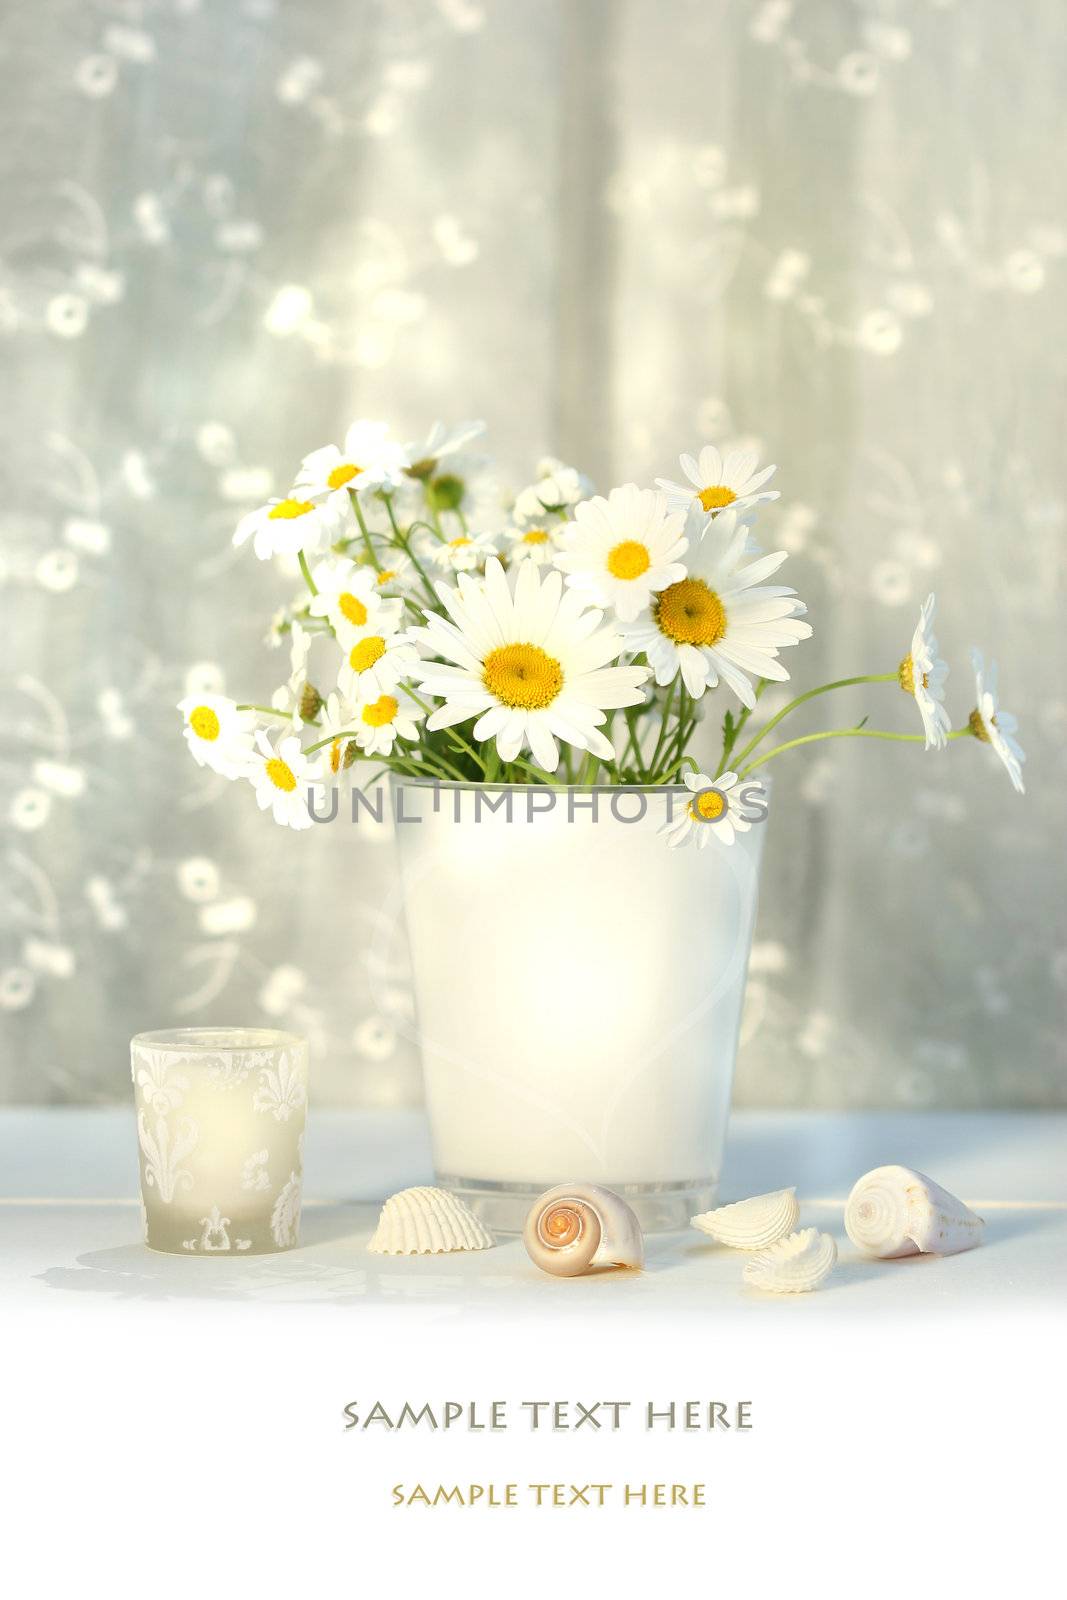 Little white daisies and seashells with white lace curtains 